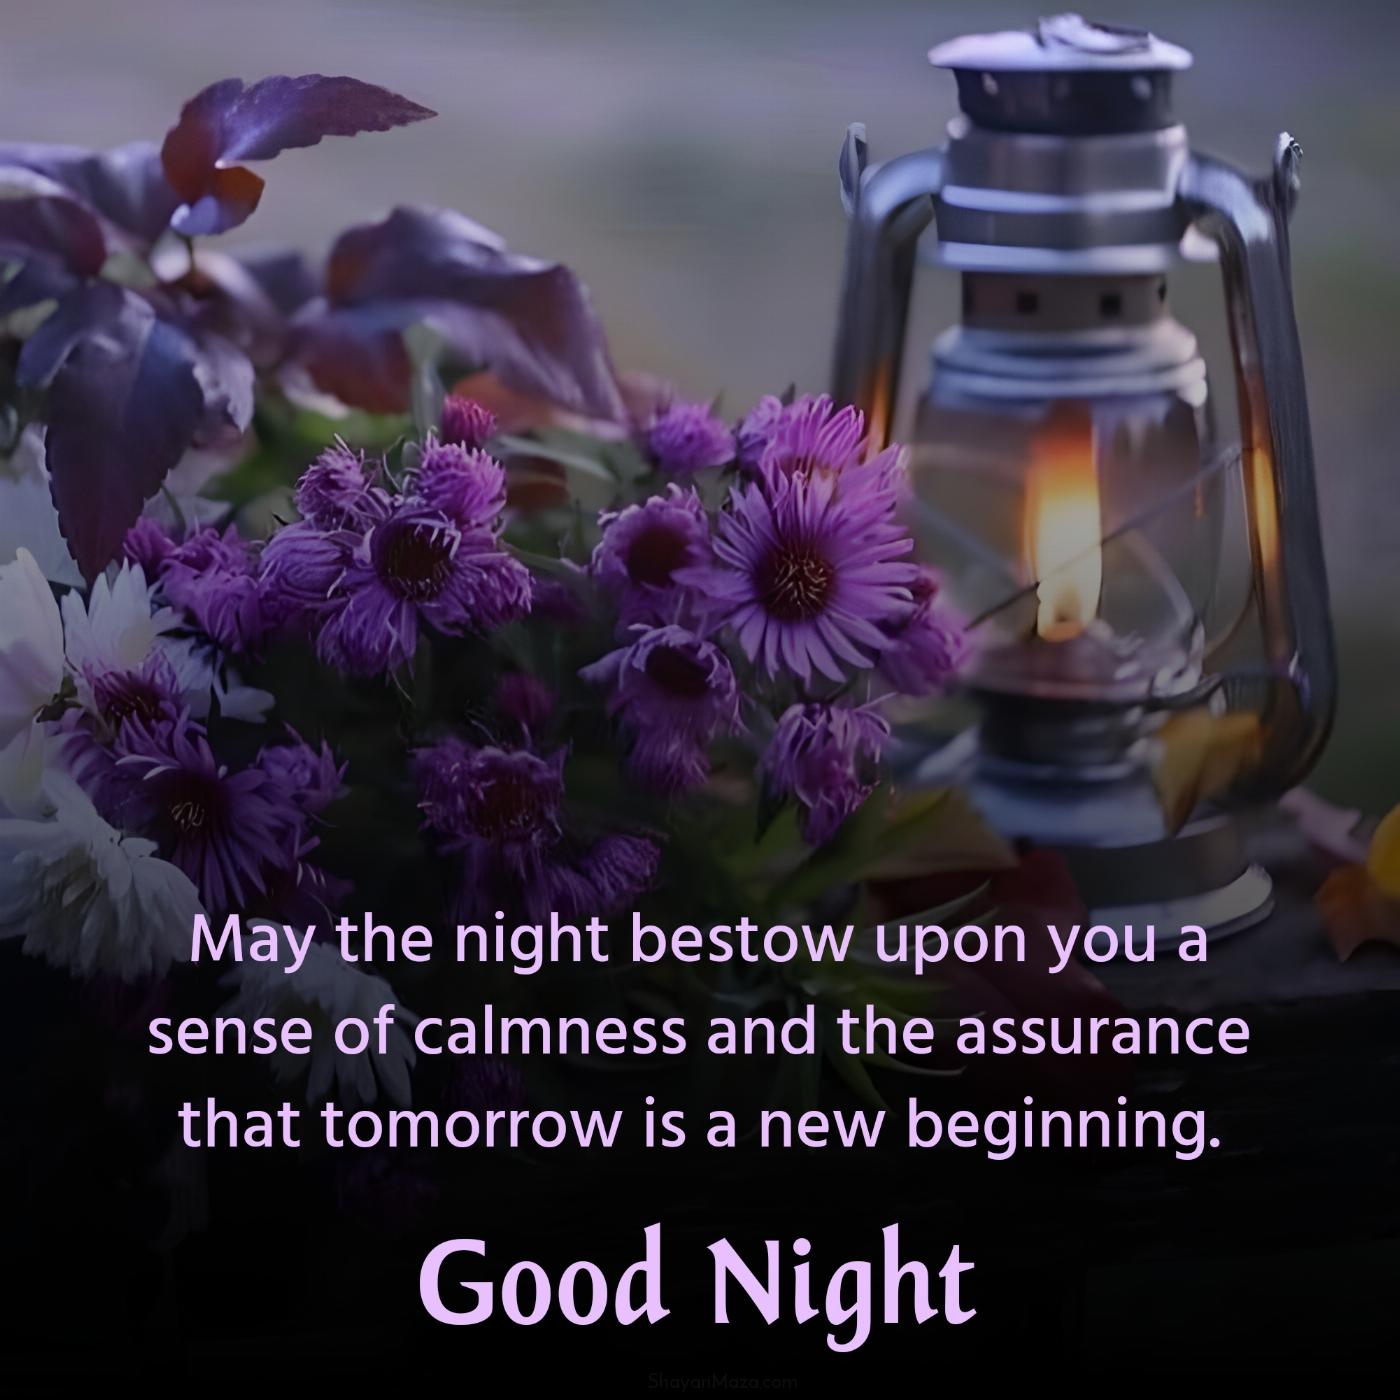 May the night bestow upon you a sense of calmness